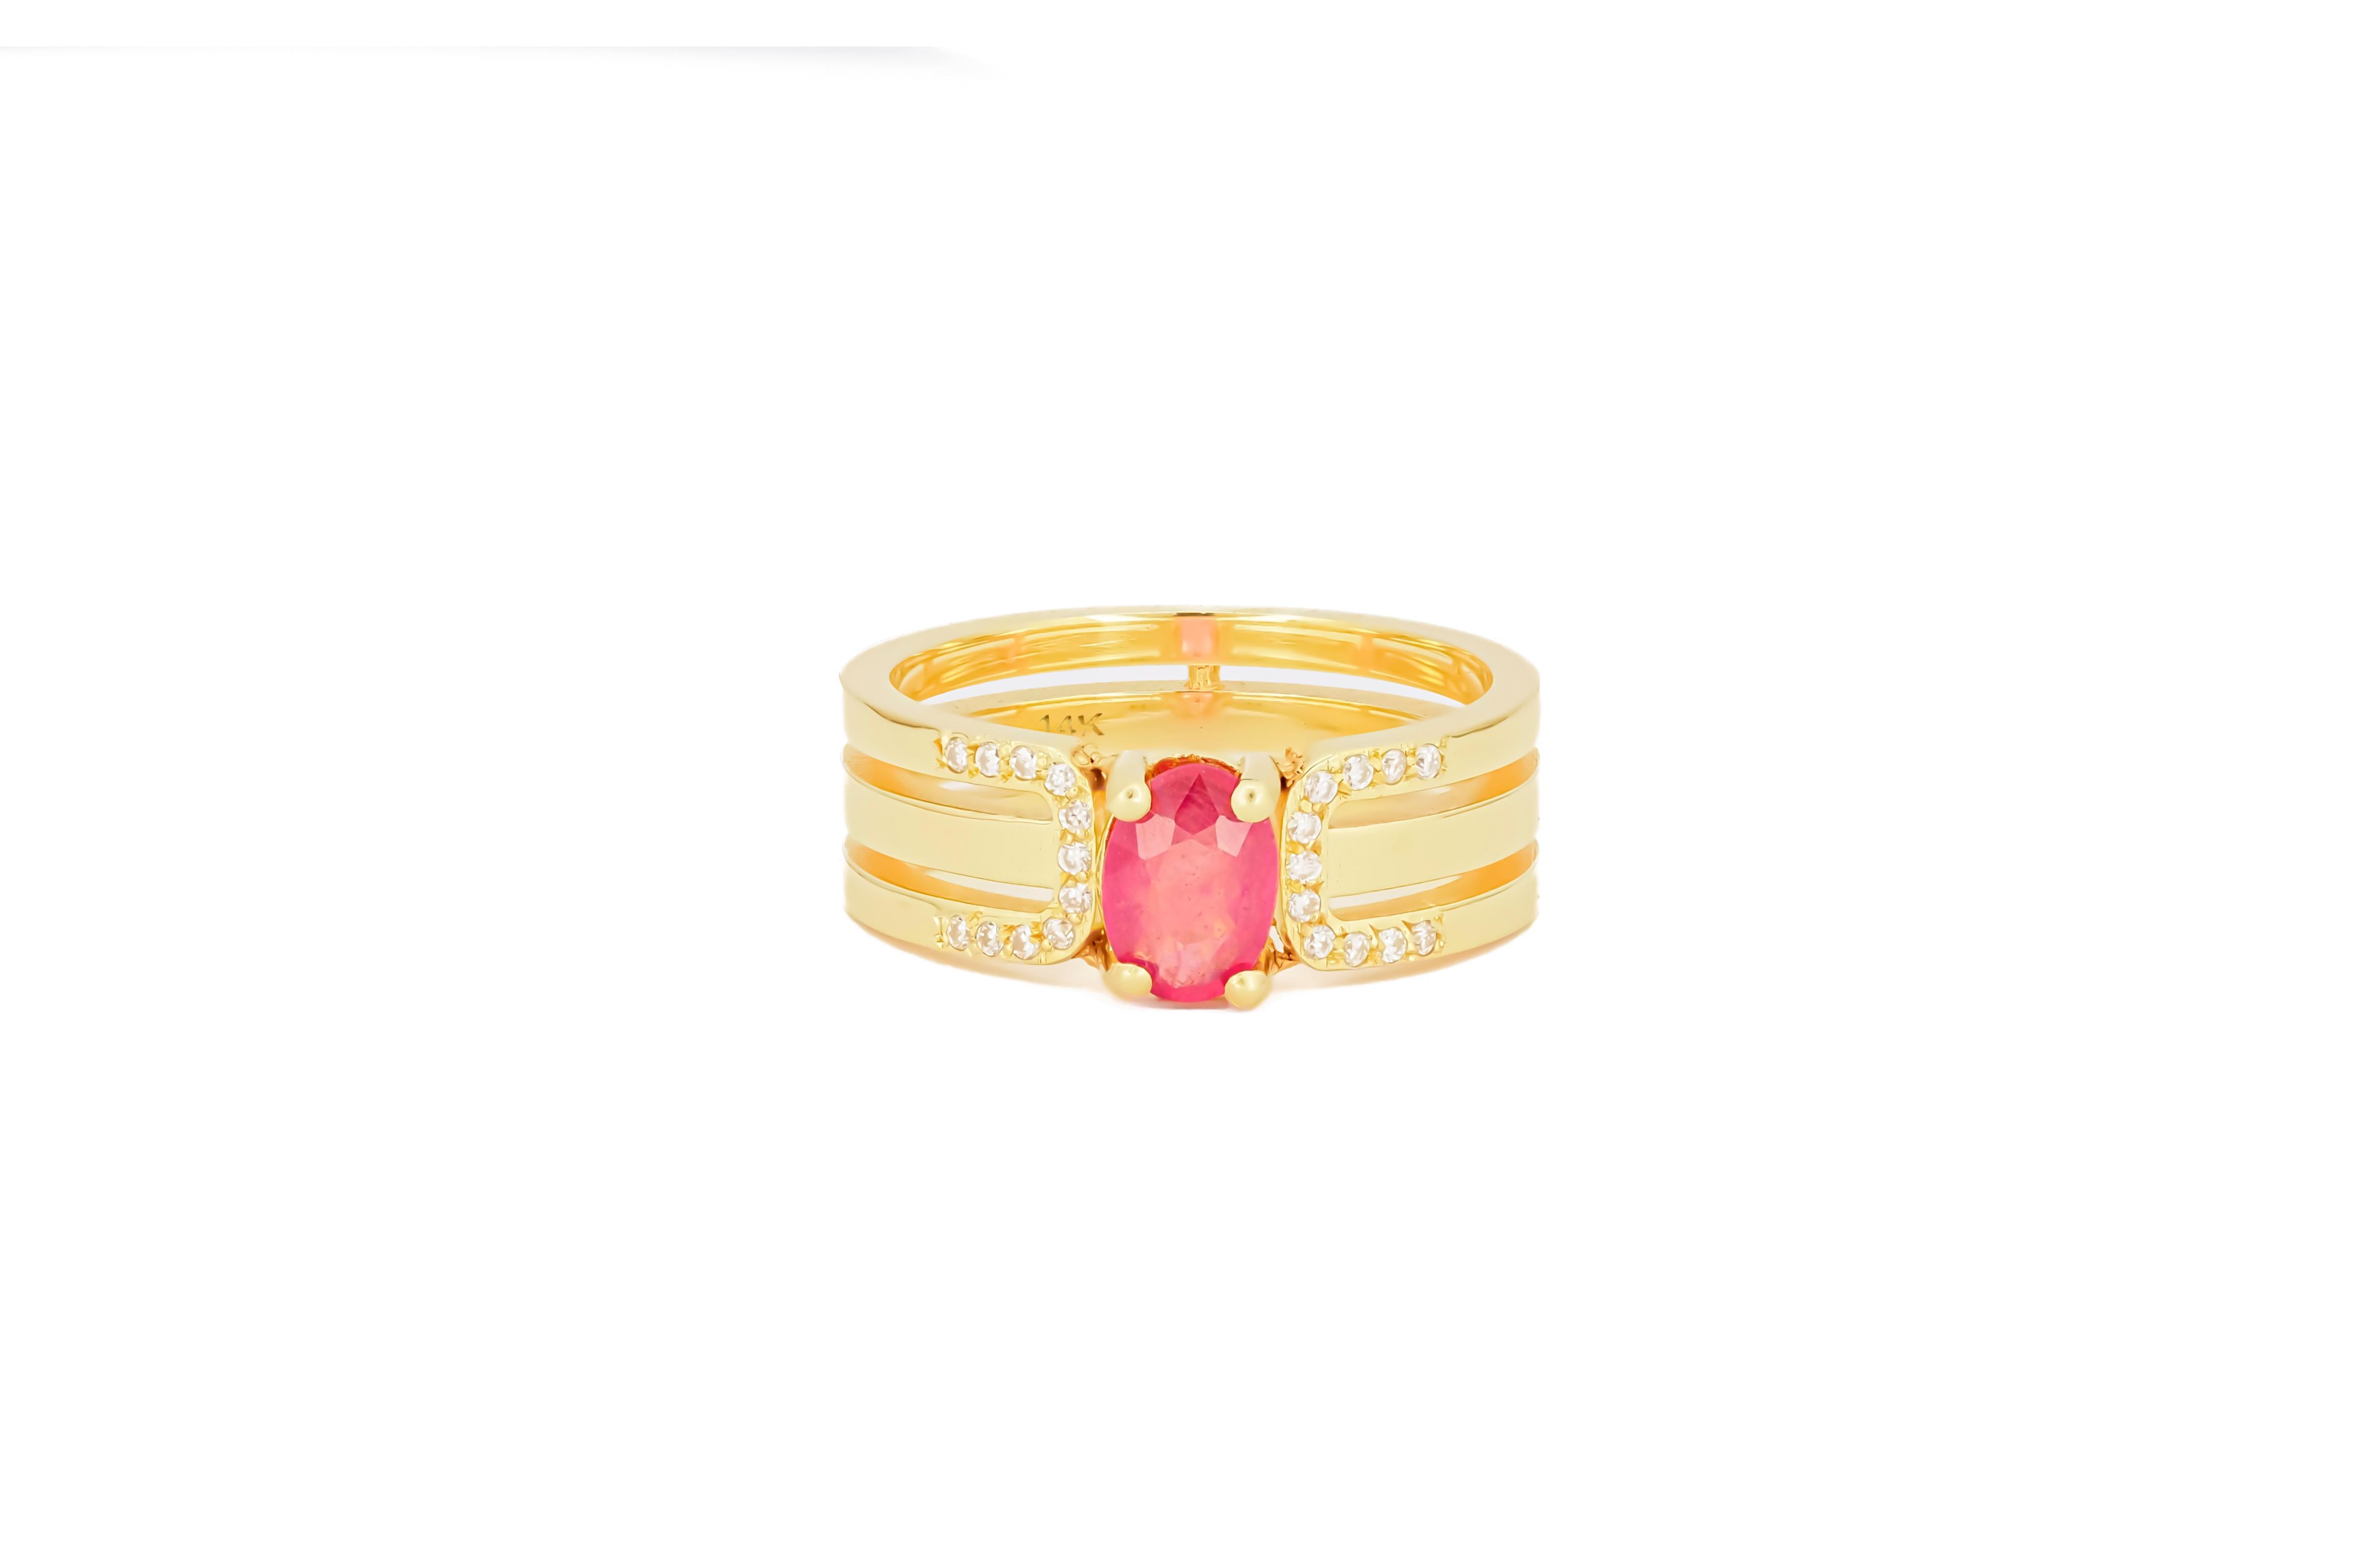 For Sale:  14 K Gold Mens Ring with Ruby. 2